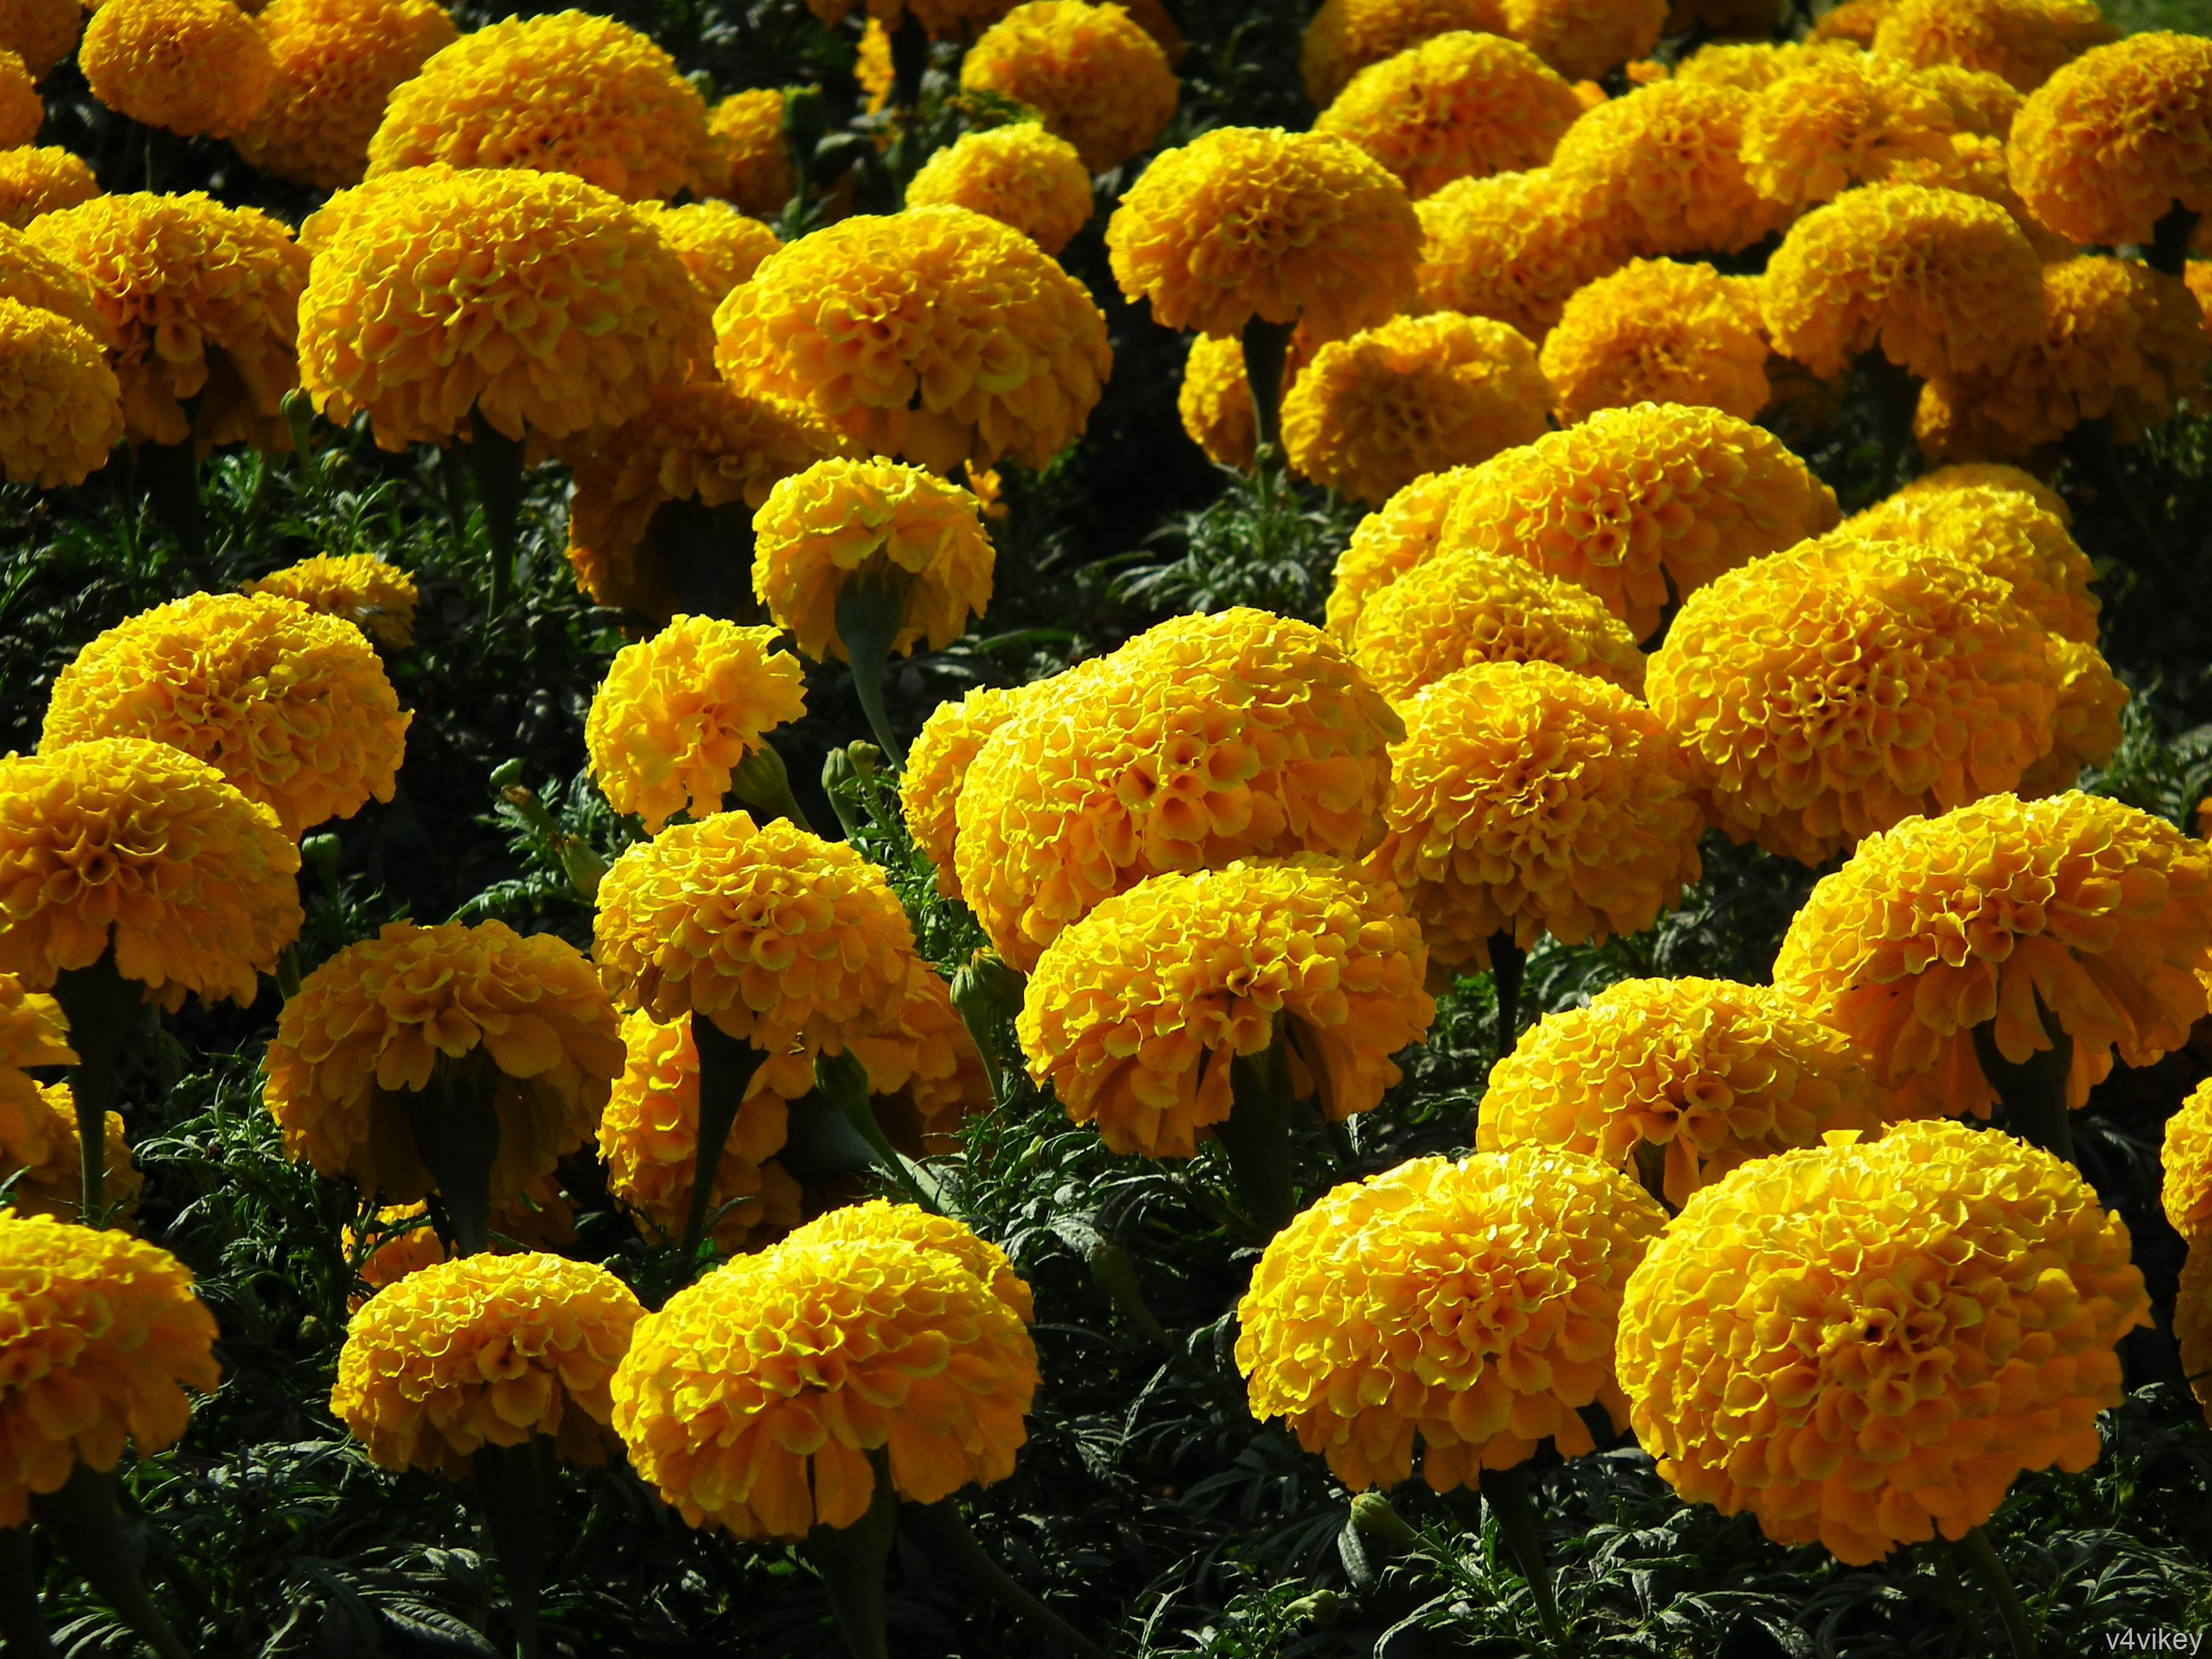 Marigold plant would improve the eyesight and lighten the mood